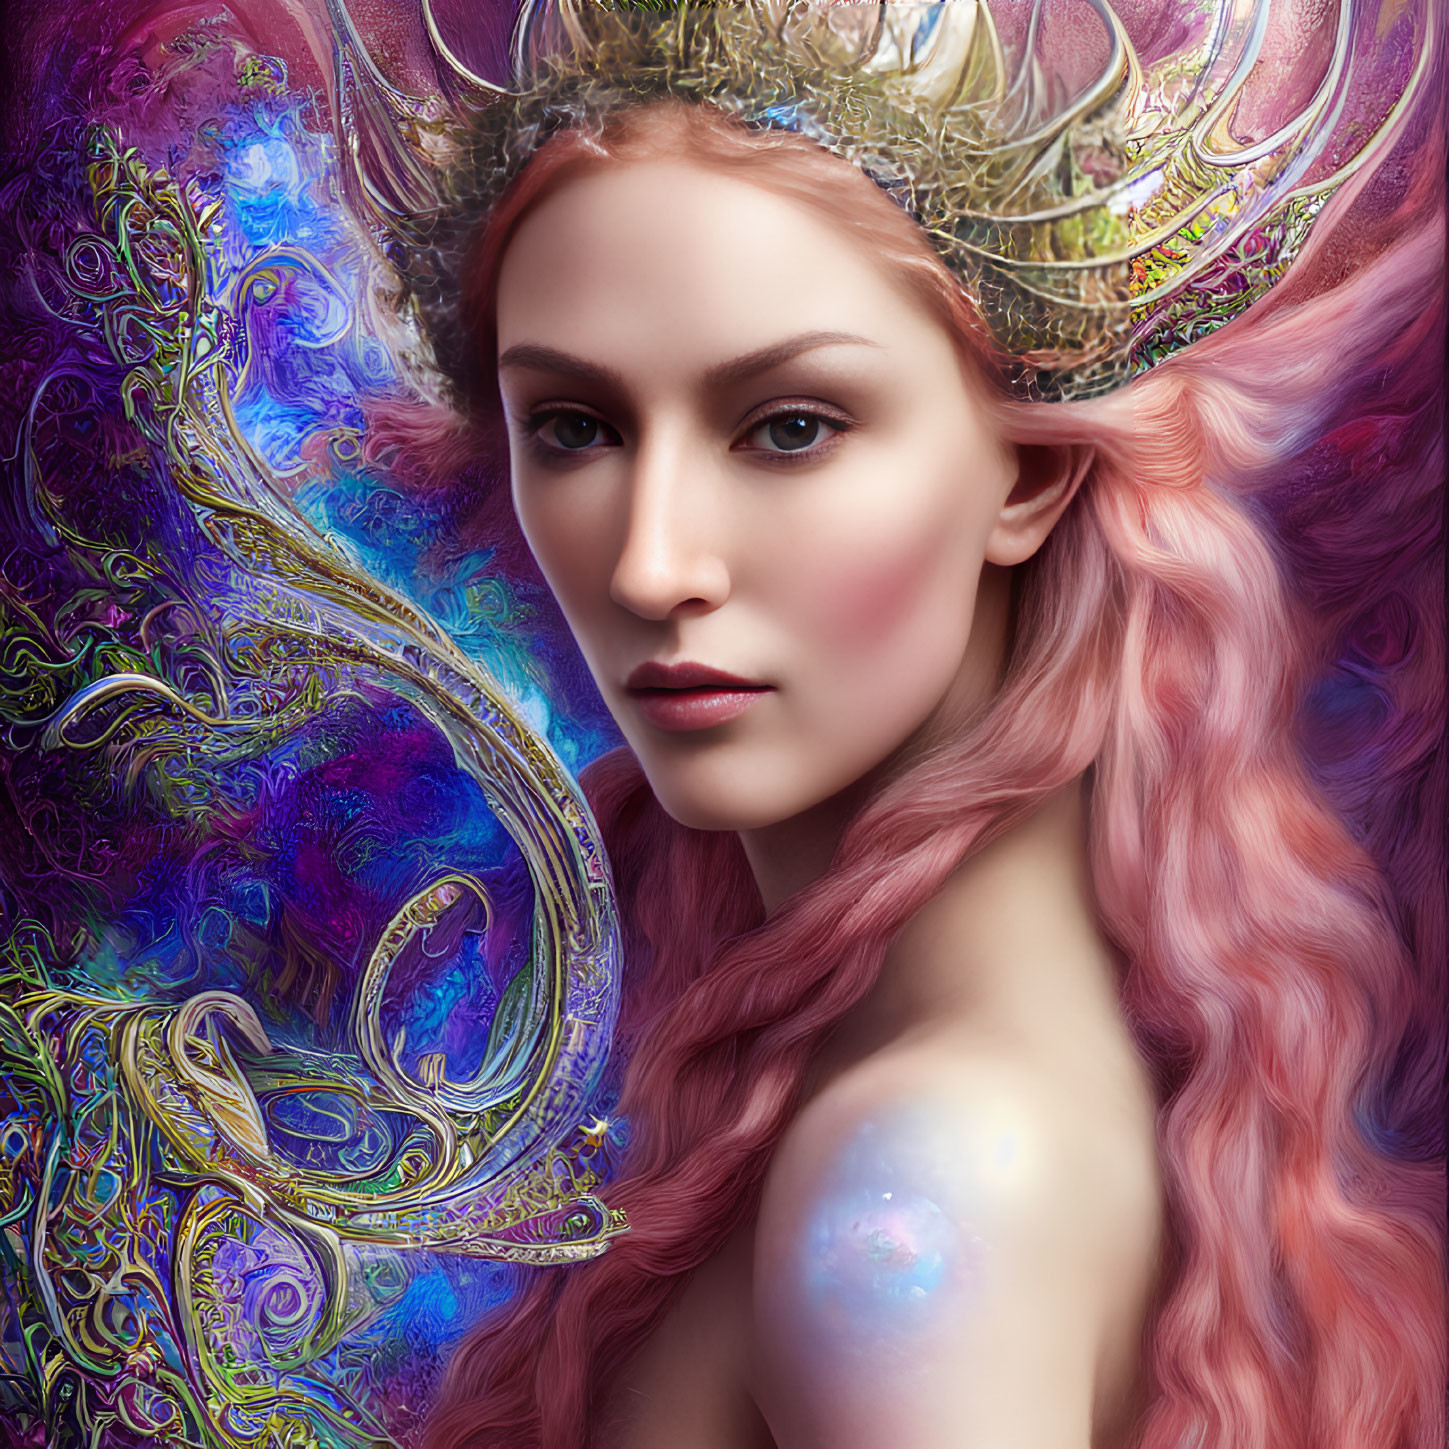 Fantastical image: Woman with pink hair and ornate headdress.